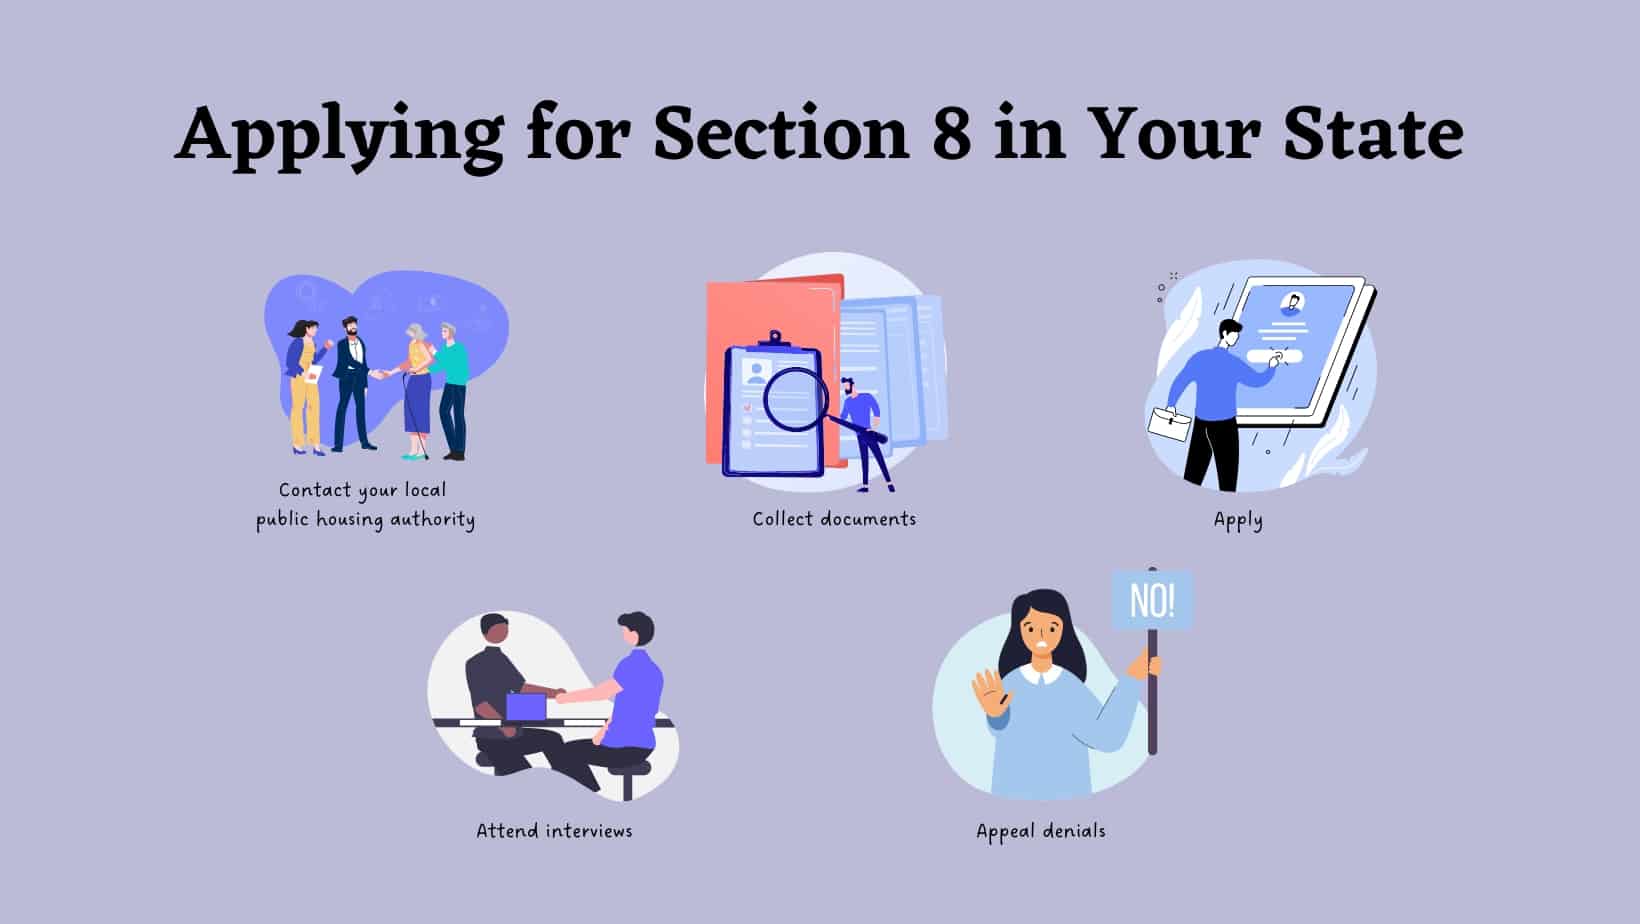 Applying for Section 8 in Your State